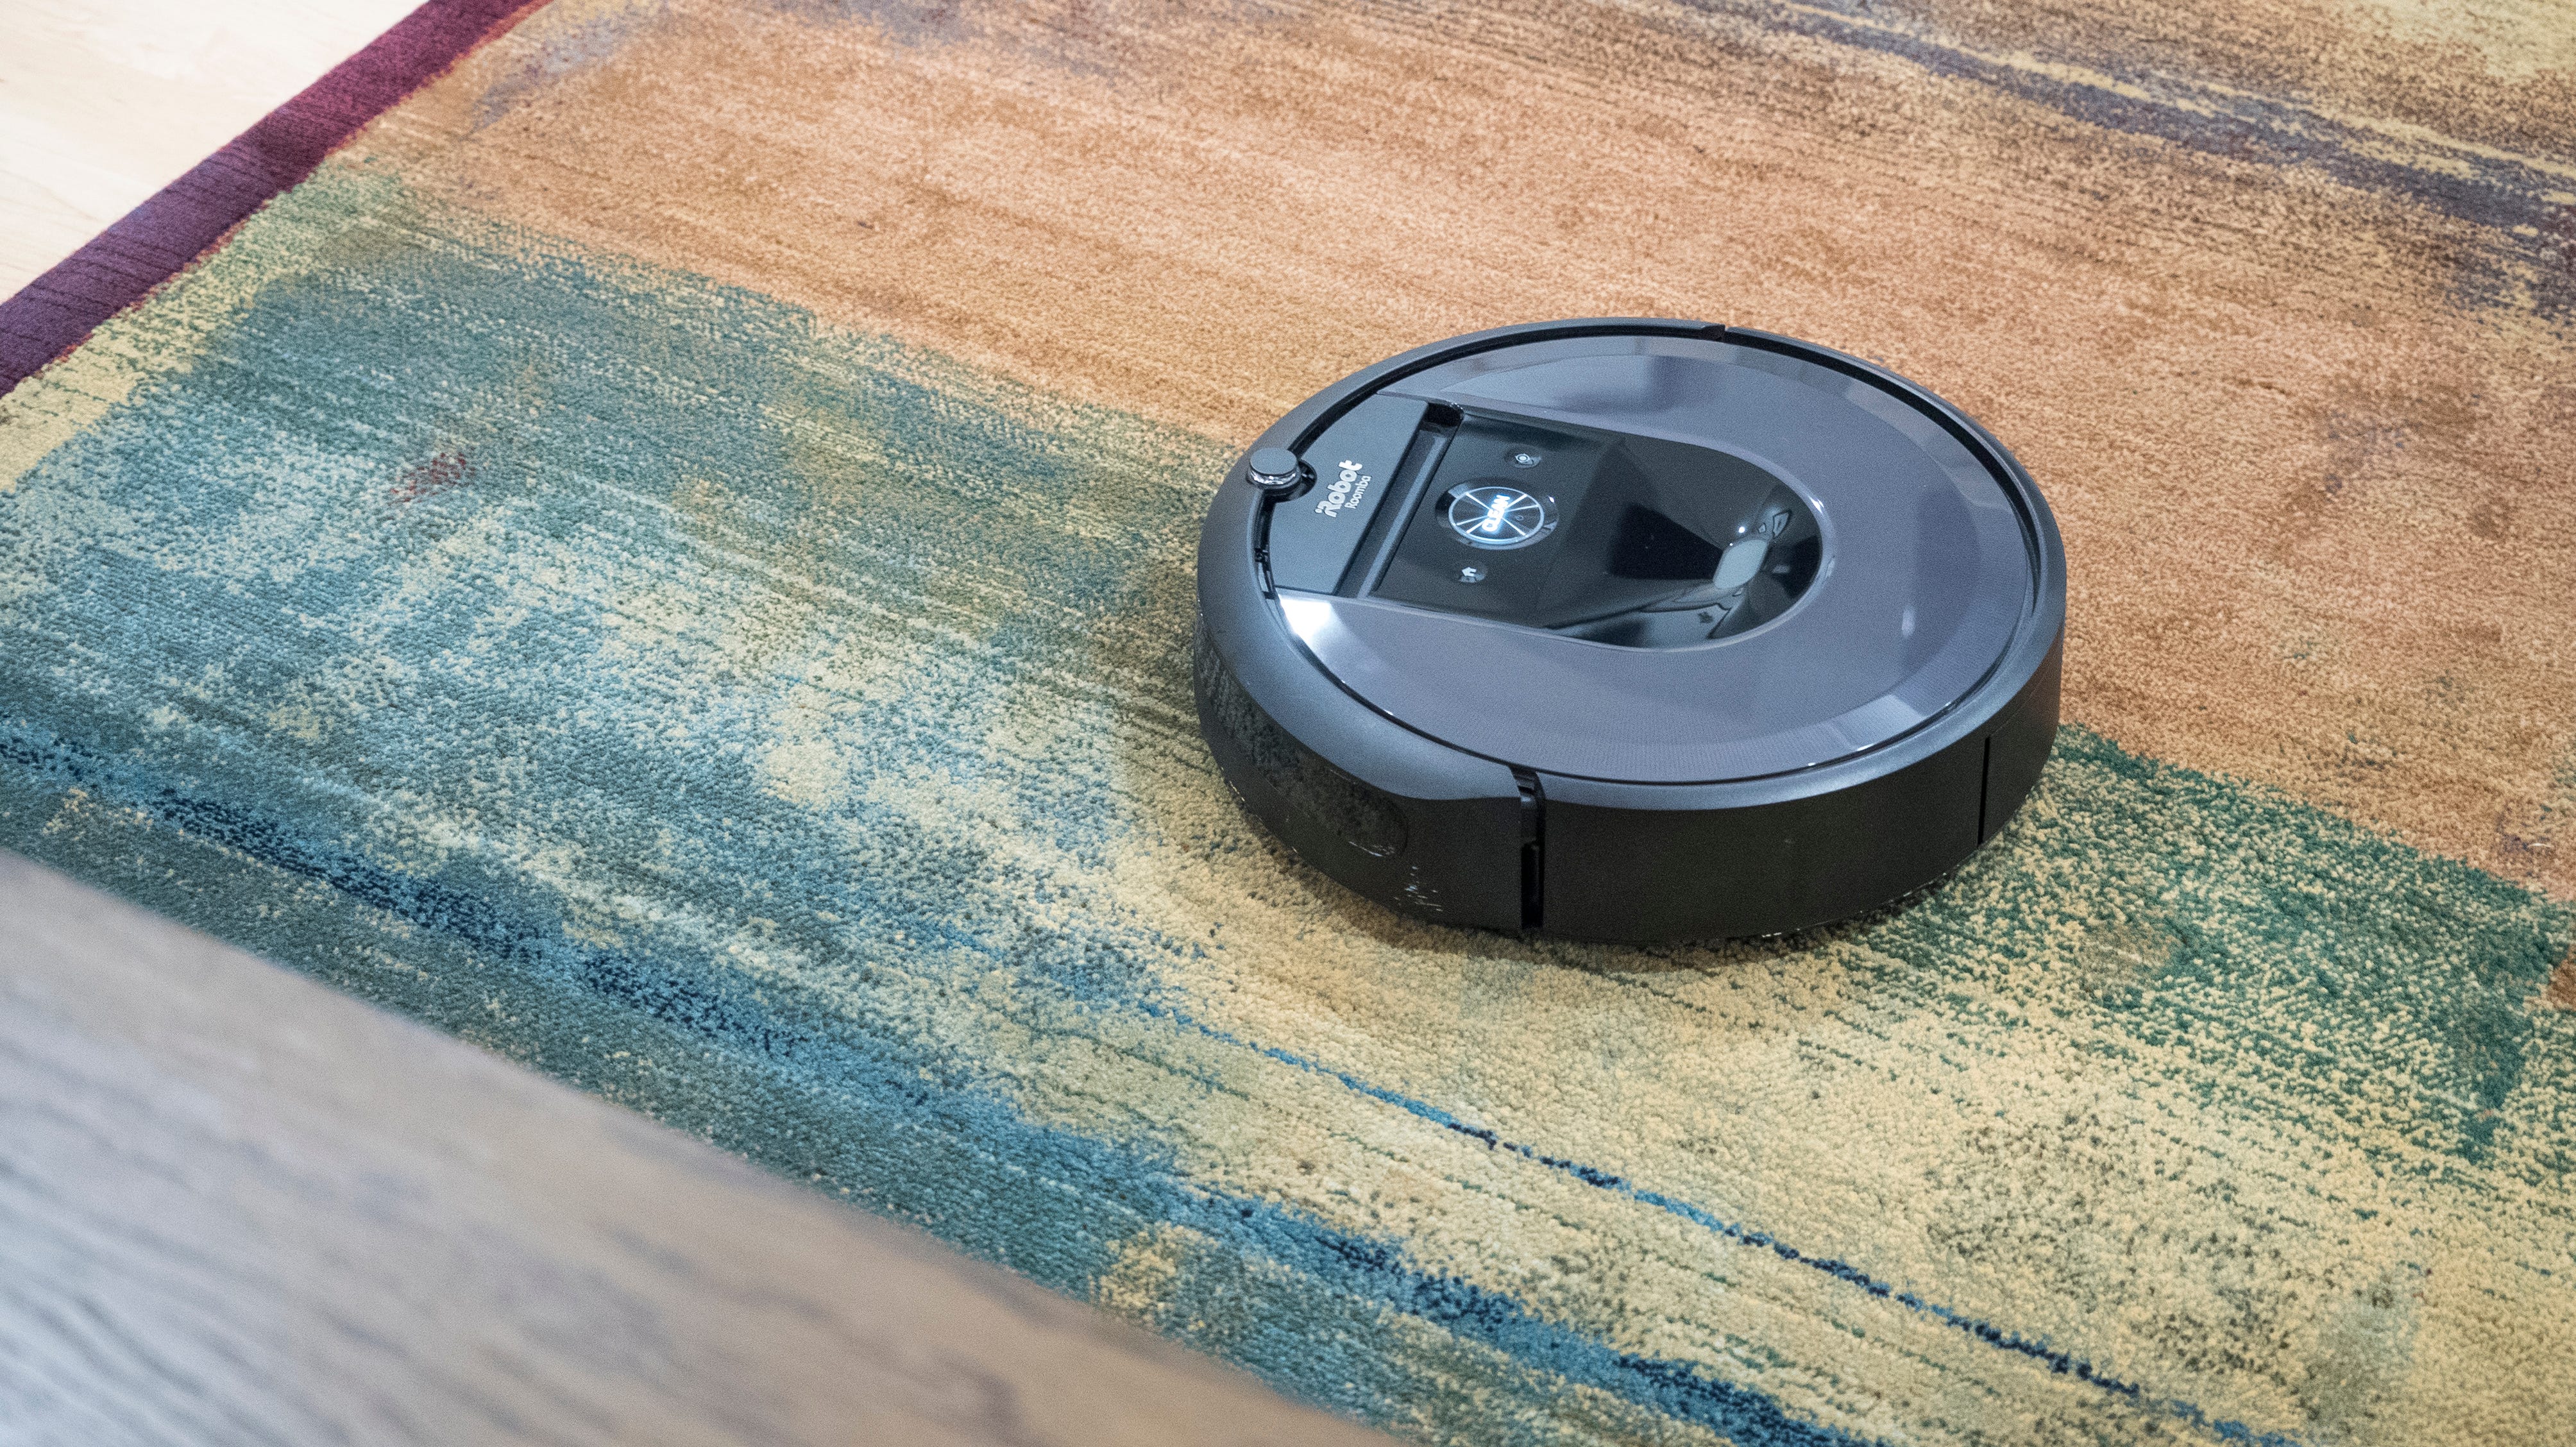 The Best Robot Vacuums For 2019 Irobot, What The Best Roomba For Hardwood Floors